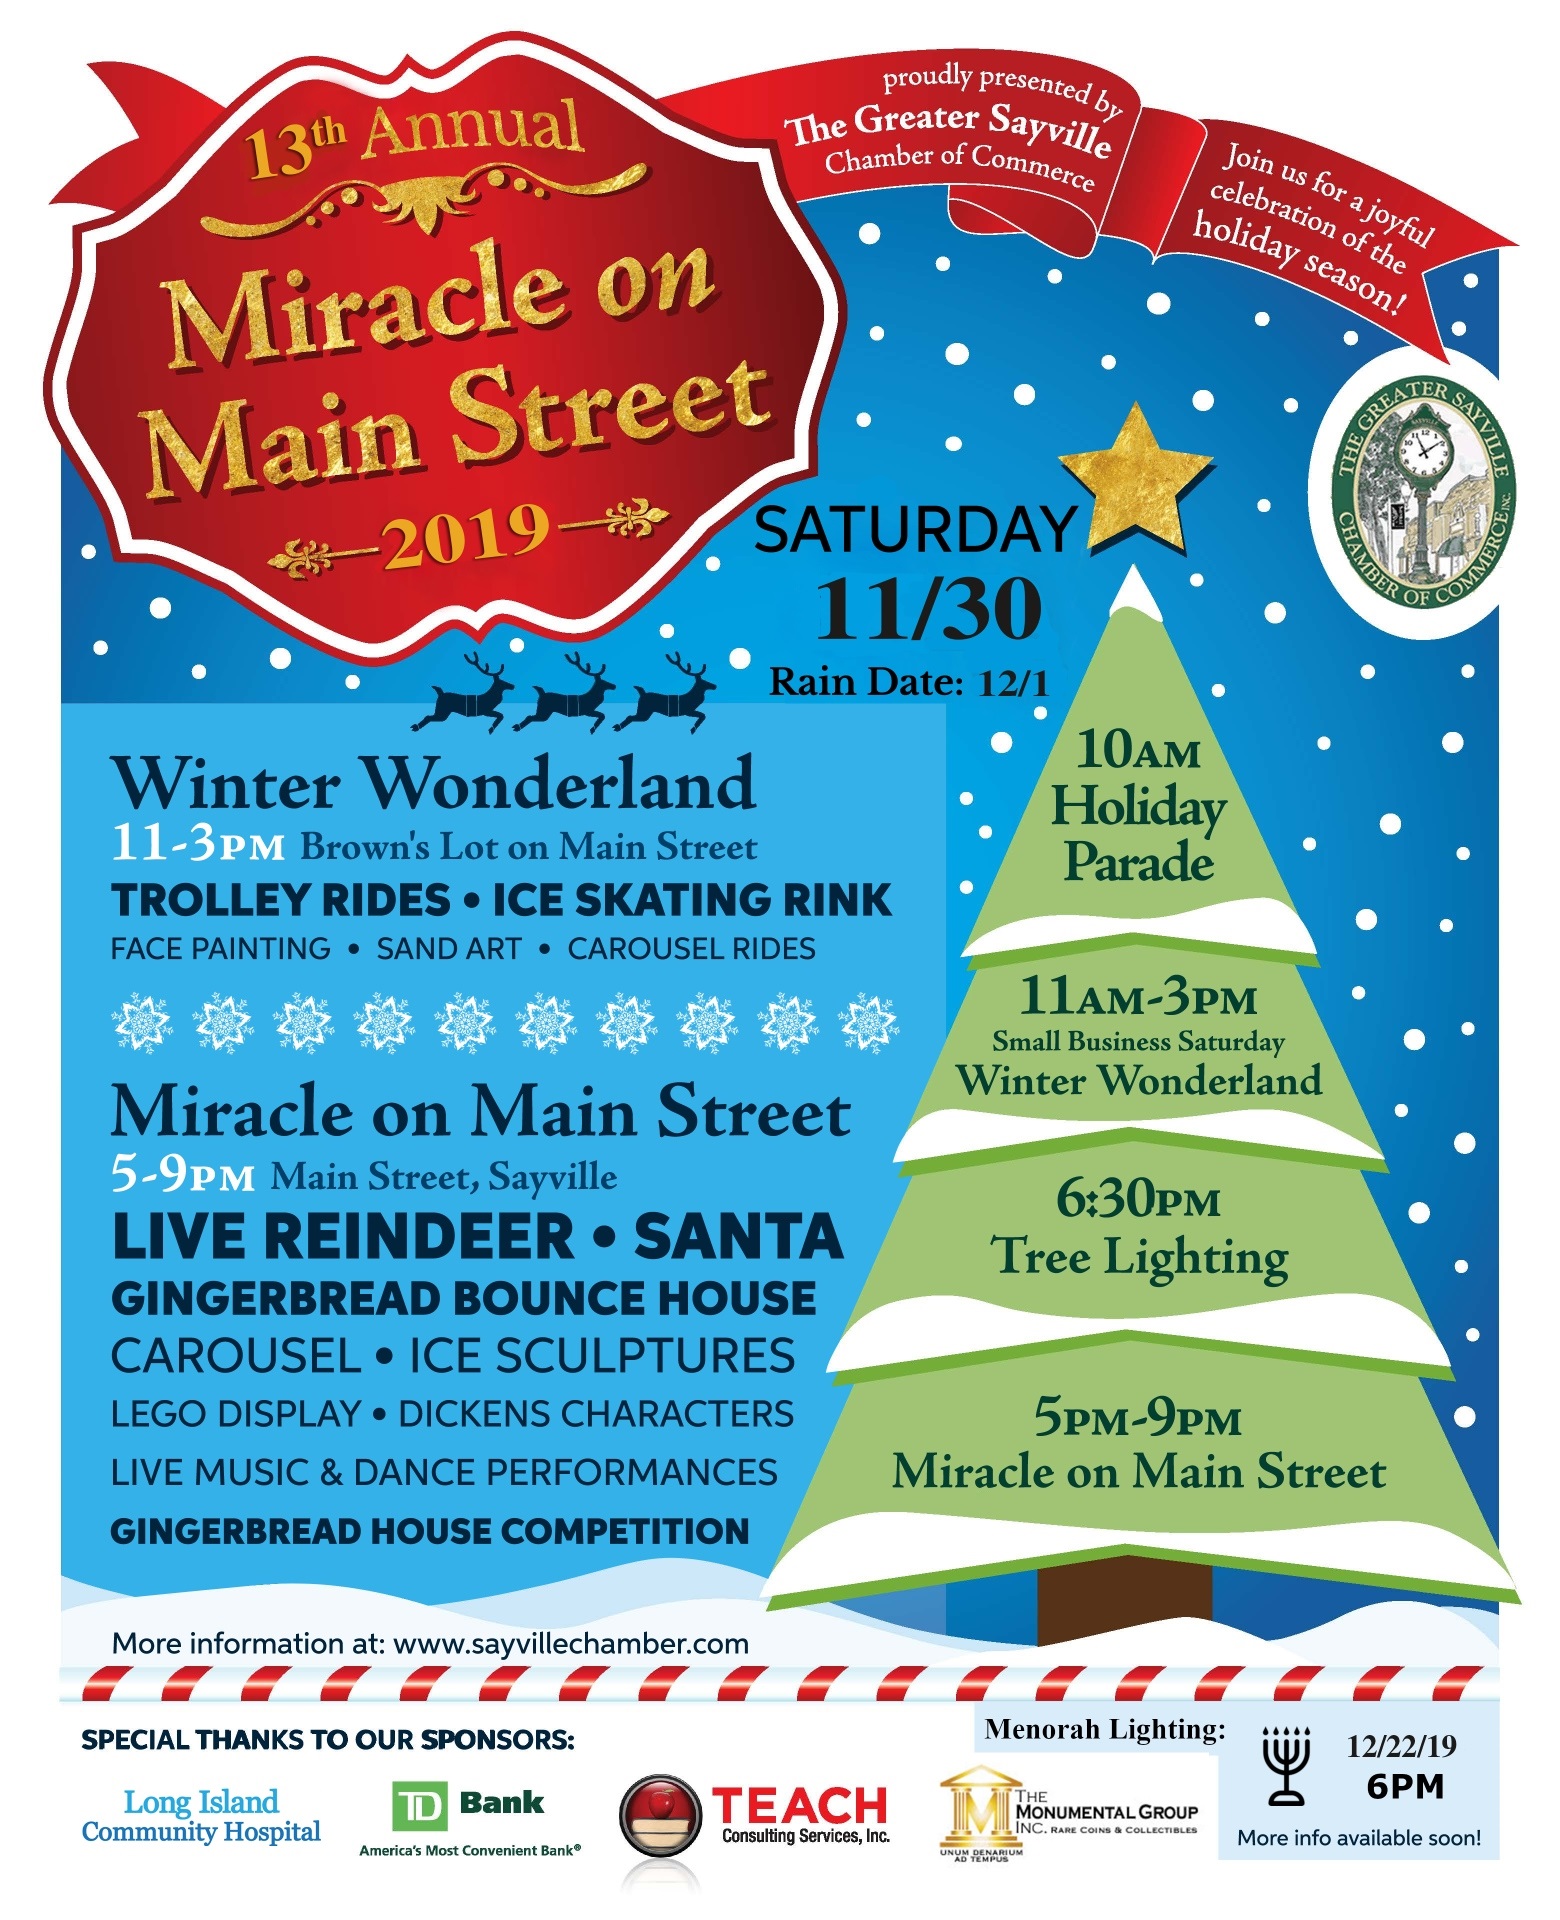 13th Annual Miracle on Main on Main Street